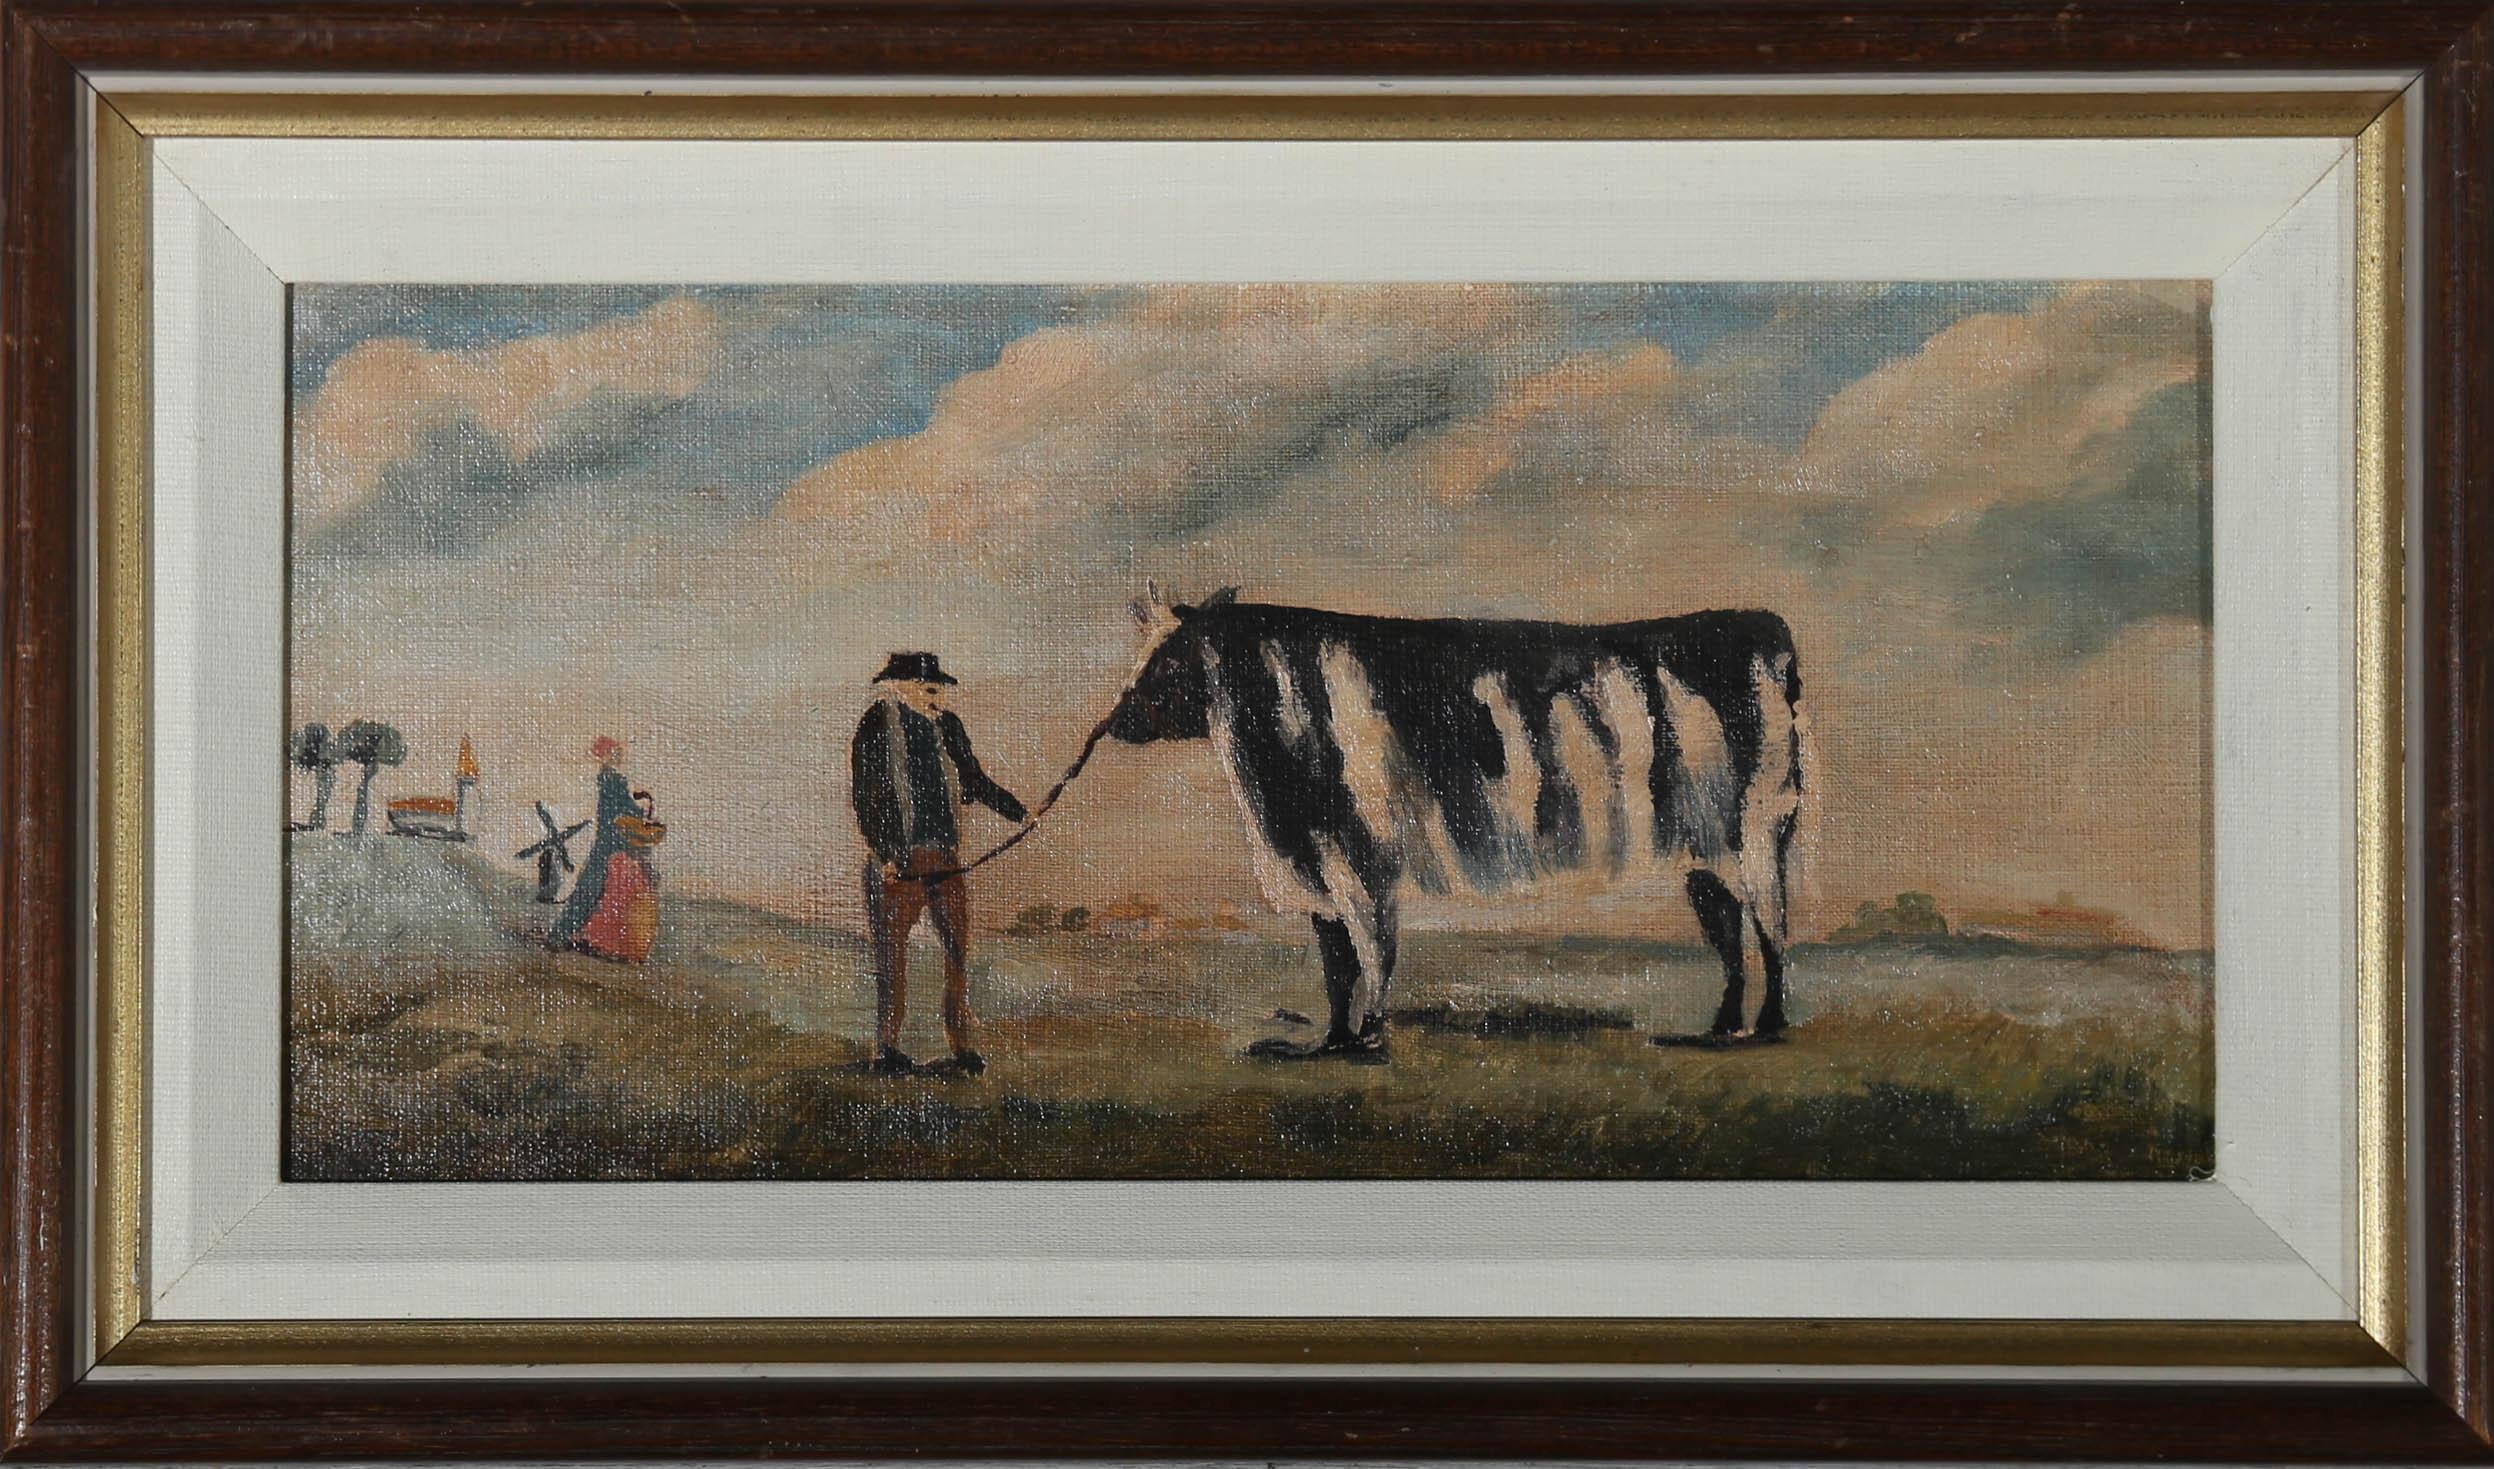 A thoroughly charming 20th Century Folk art scene in oil, showing a handsome heifer with its proud owner. The naive style, mirroring that of original 19th Century Folk art paintings of similar subjects, adds much fun and character to the piece. The